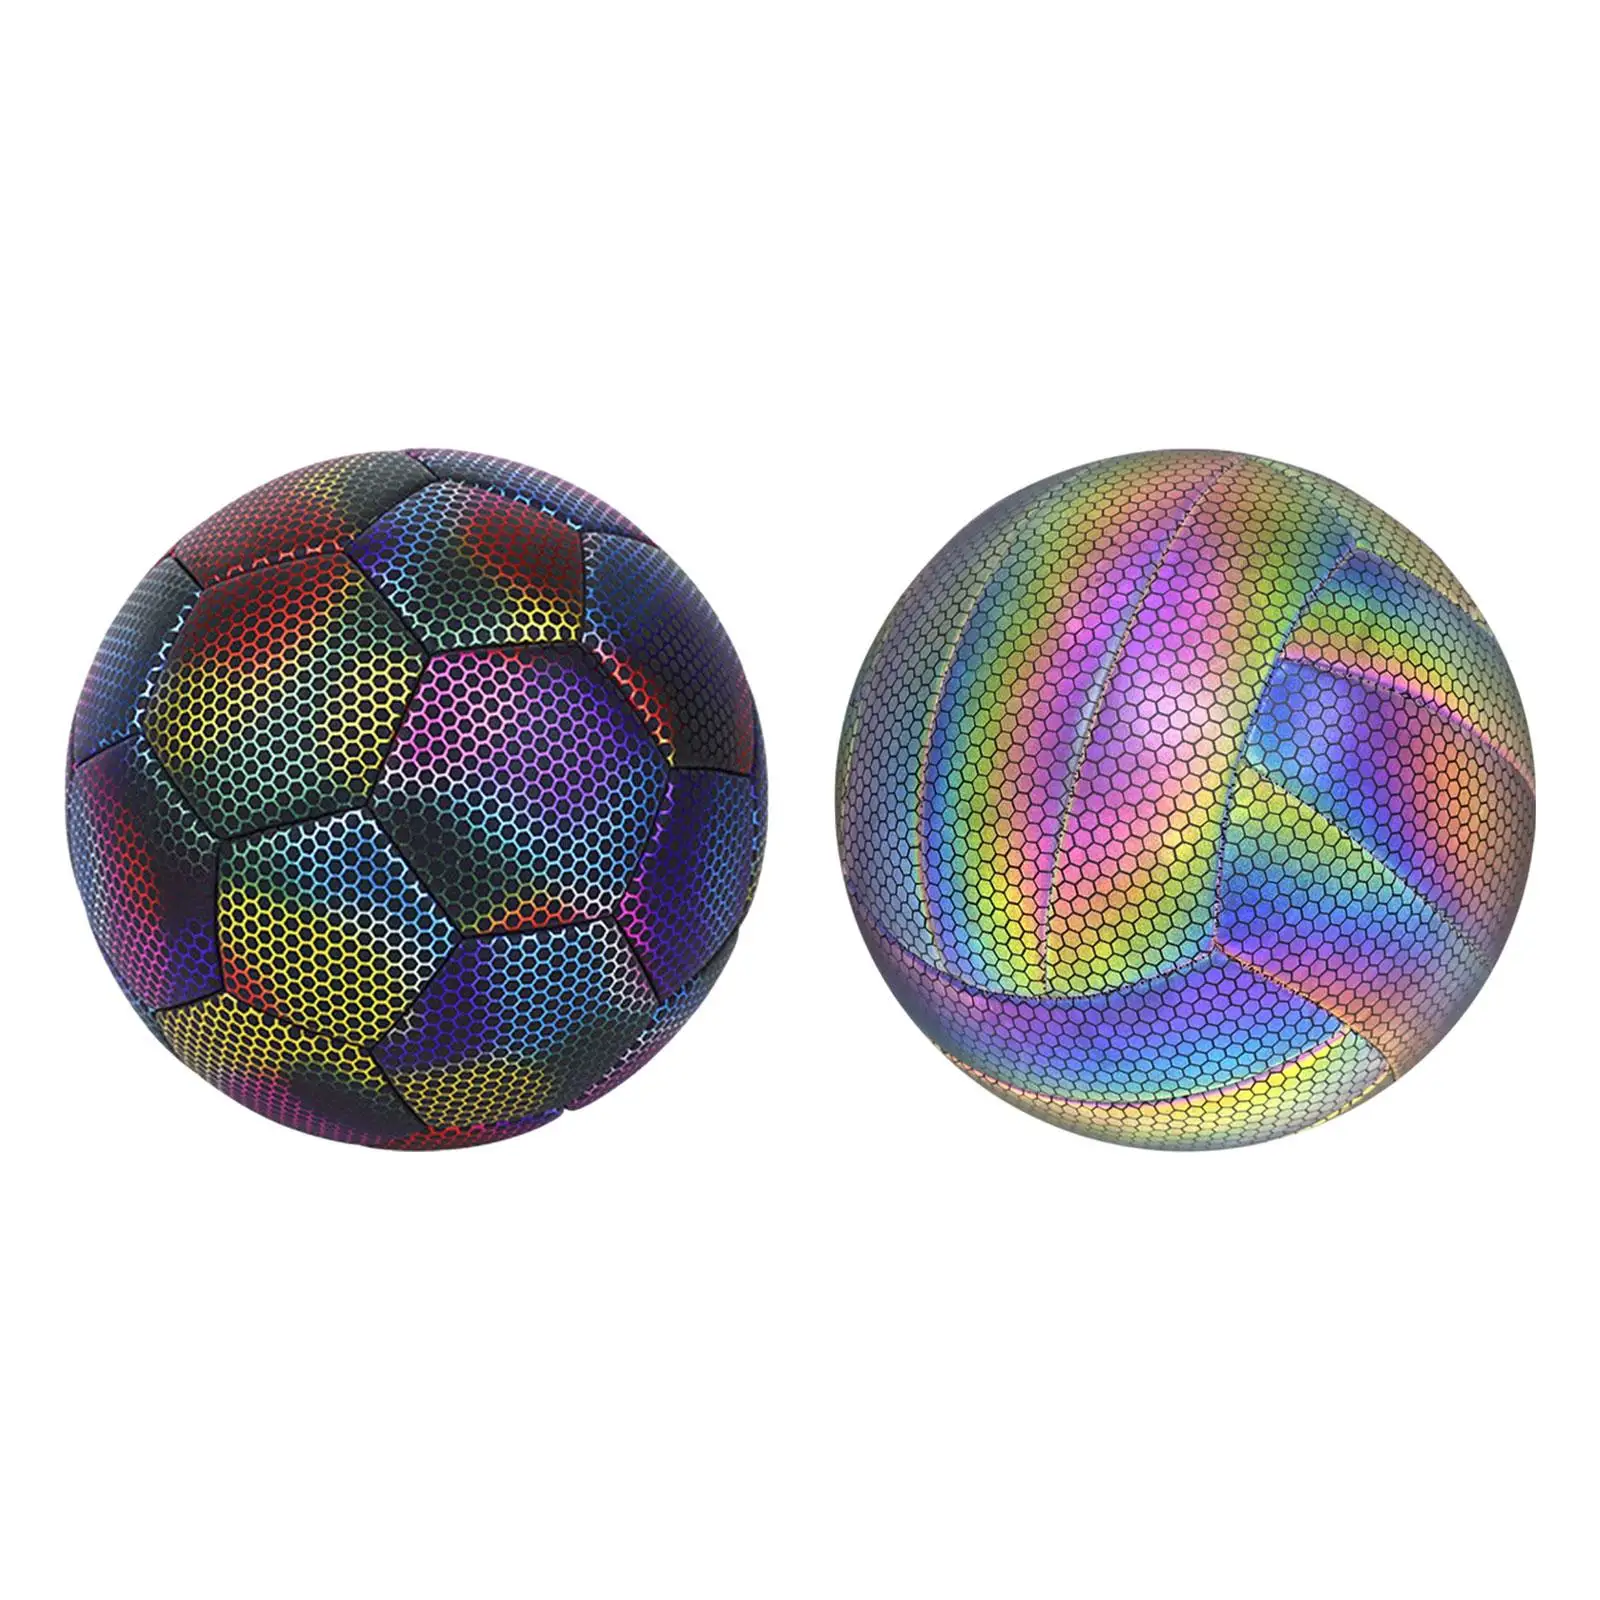 

Holographic Soccer Ball Reflective Glowing Soccer Ball Gift for Boys, Girls, Men